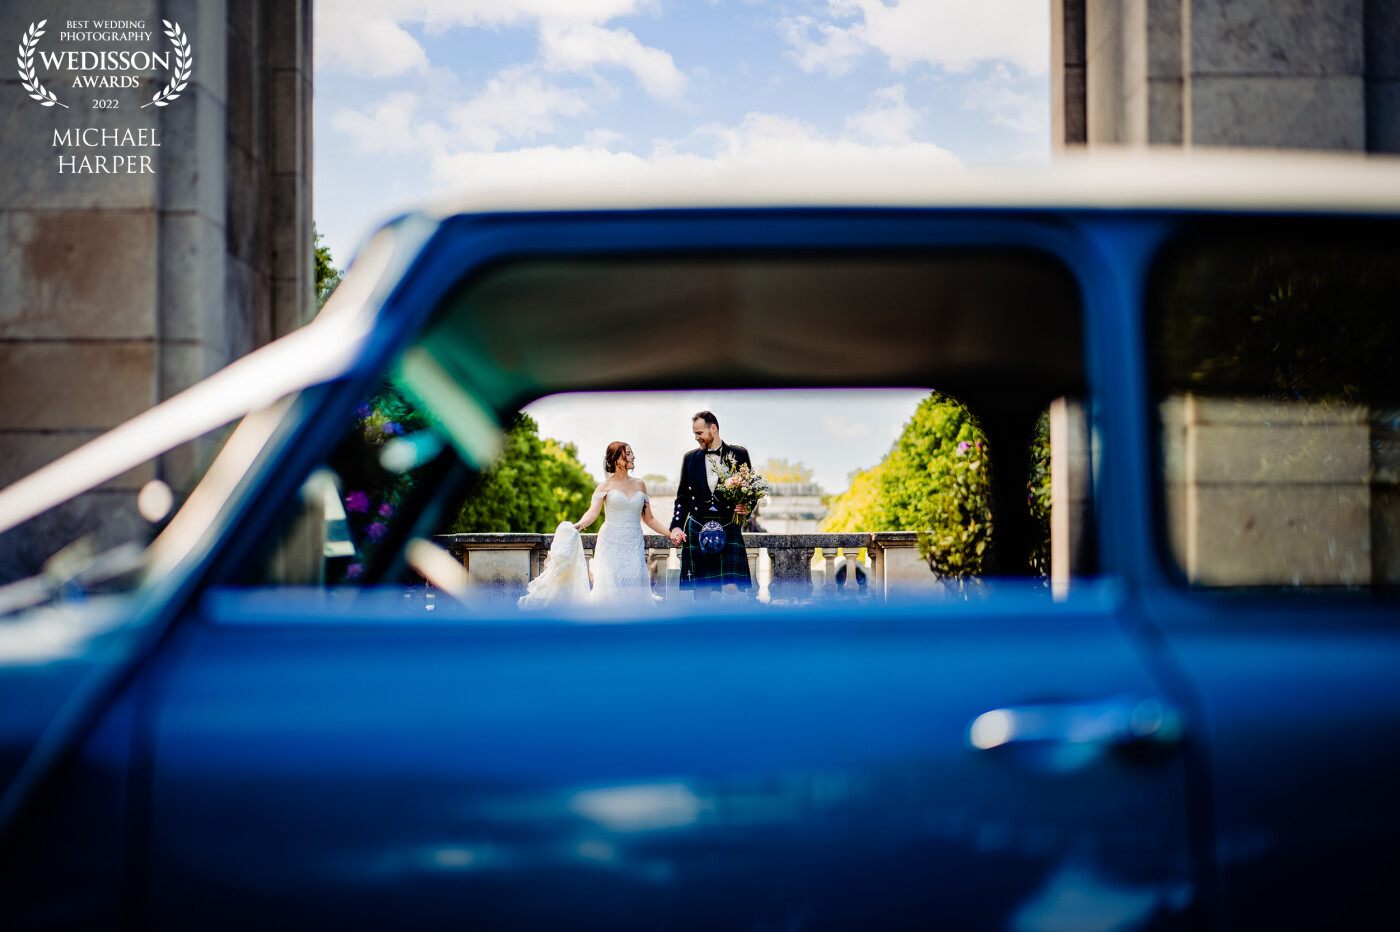 The mini was restored by the groom so we wanted in to include it somehow into their story. As the couple went for a walk it made sense in the moment to shoot through the windows into the distance as they walked into a sweet spot where they could be seen.